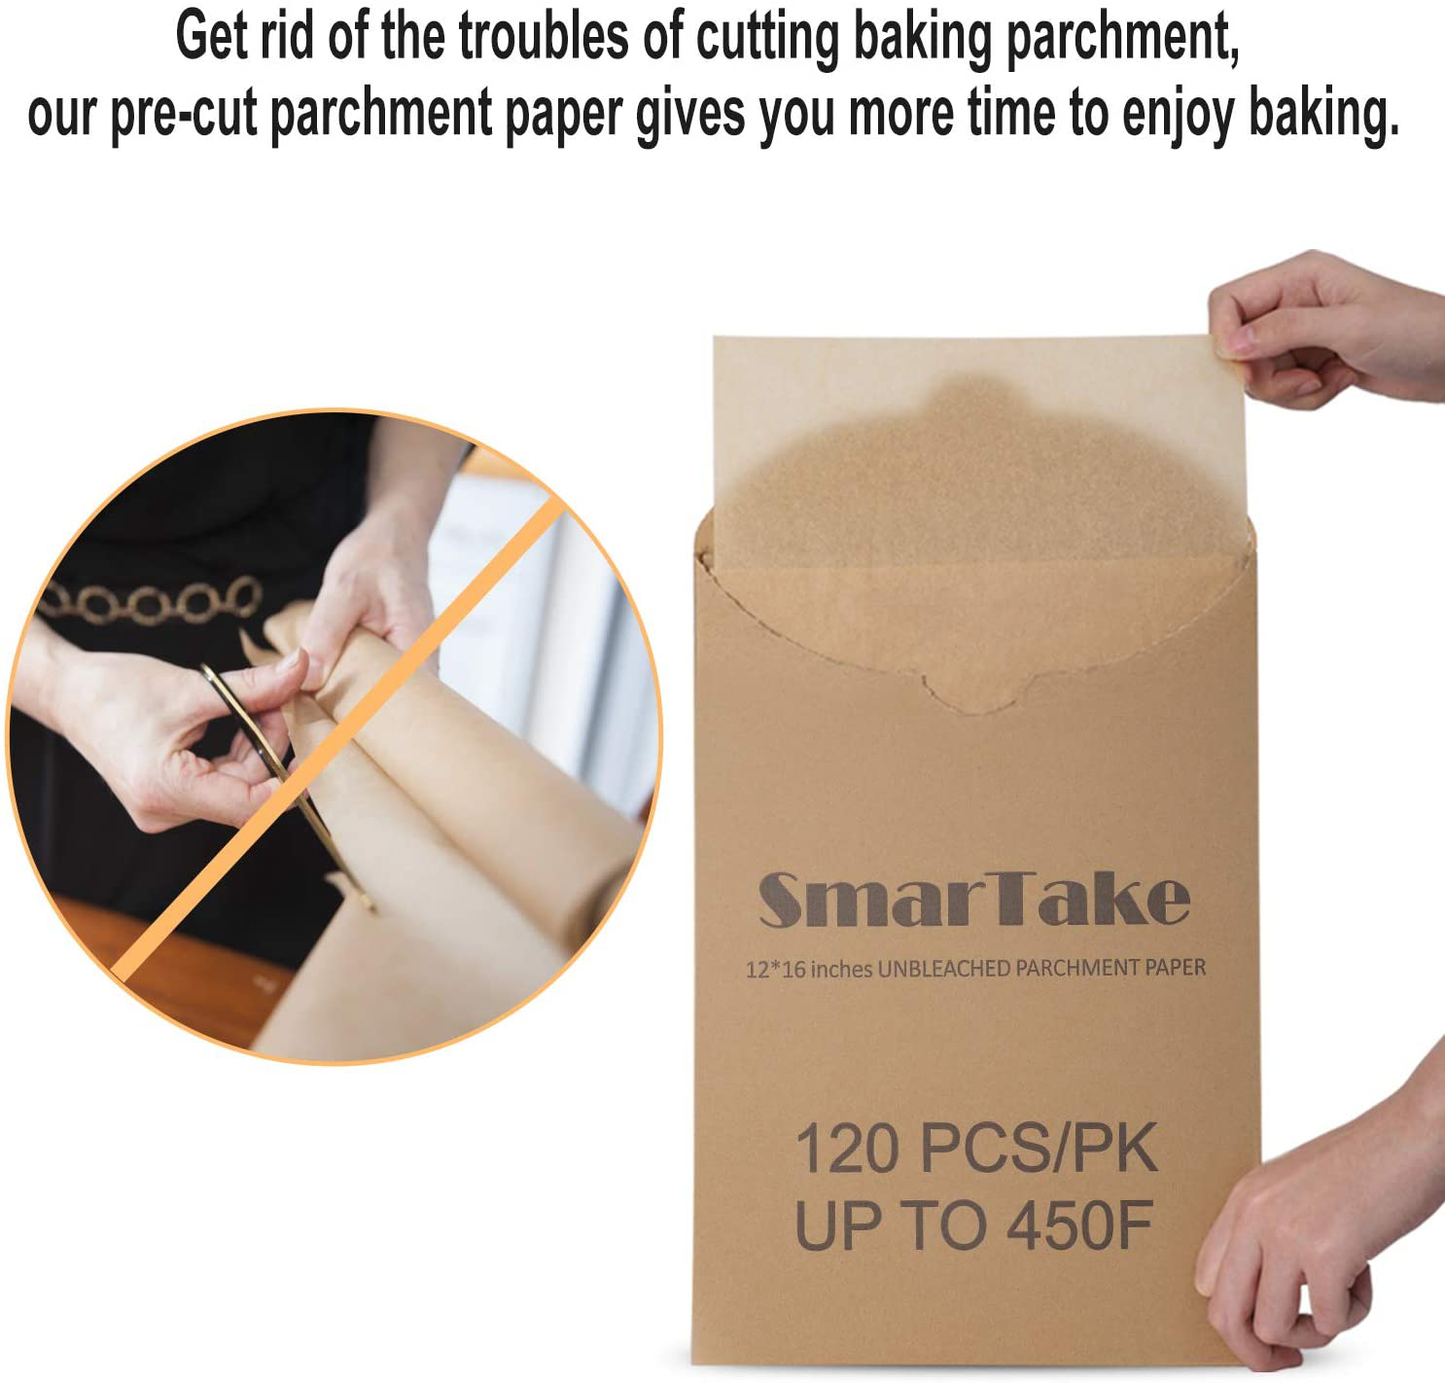 SMARTAKE 120 Pcs Parchment Paper Baking Sheets, 12 x 16 Inches Non-Stick Precut Baking Parchment, Suitable for Baking Grilling Air Fryer Steaming Bread Cup Cake Cookie and More (White)